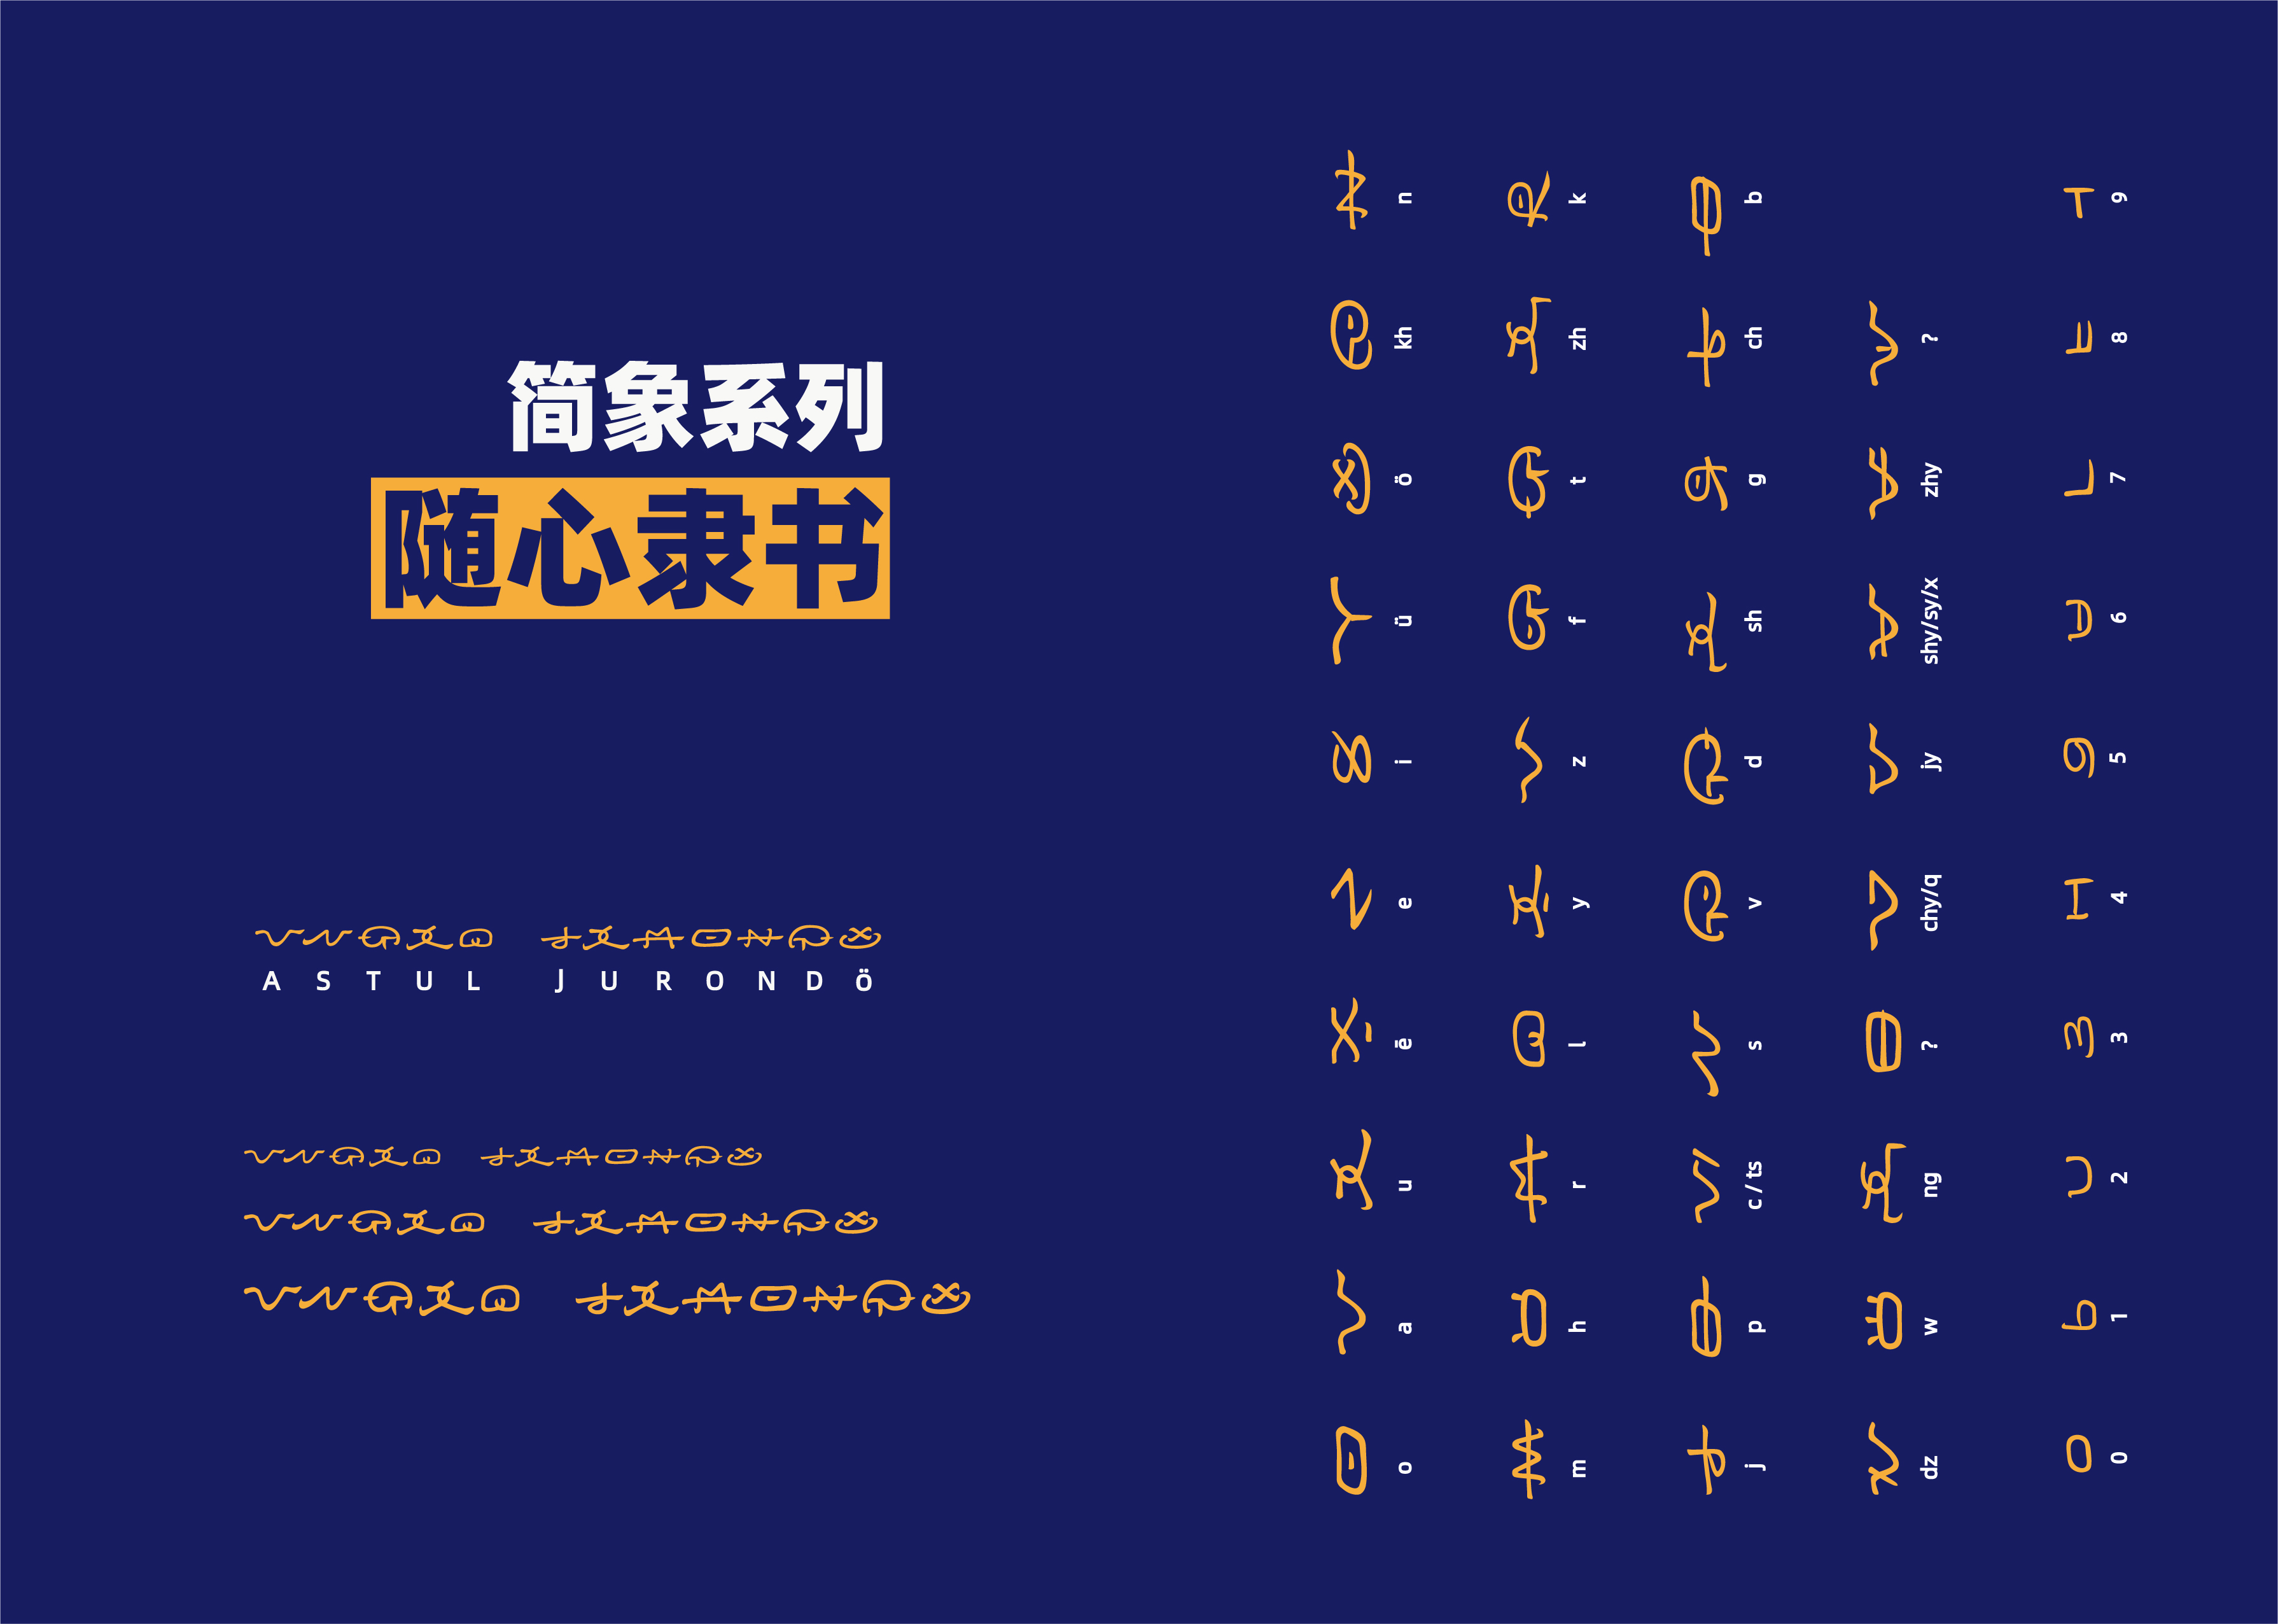 25P Collection of the latest Chinese font design schemes in 2021 #.625